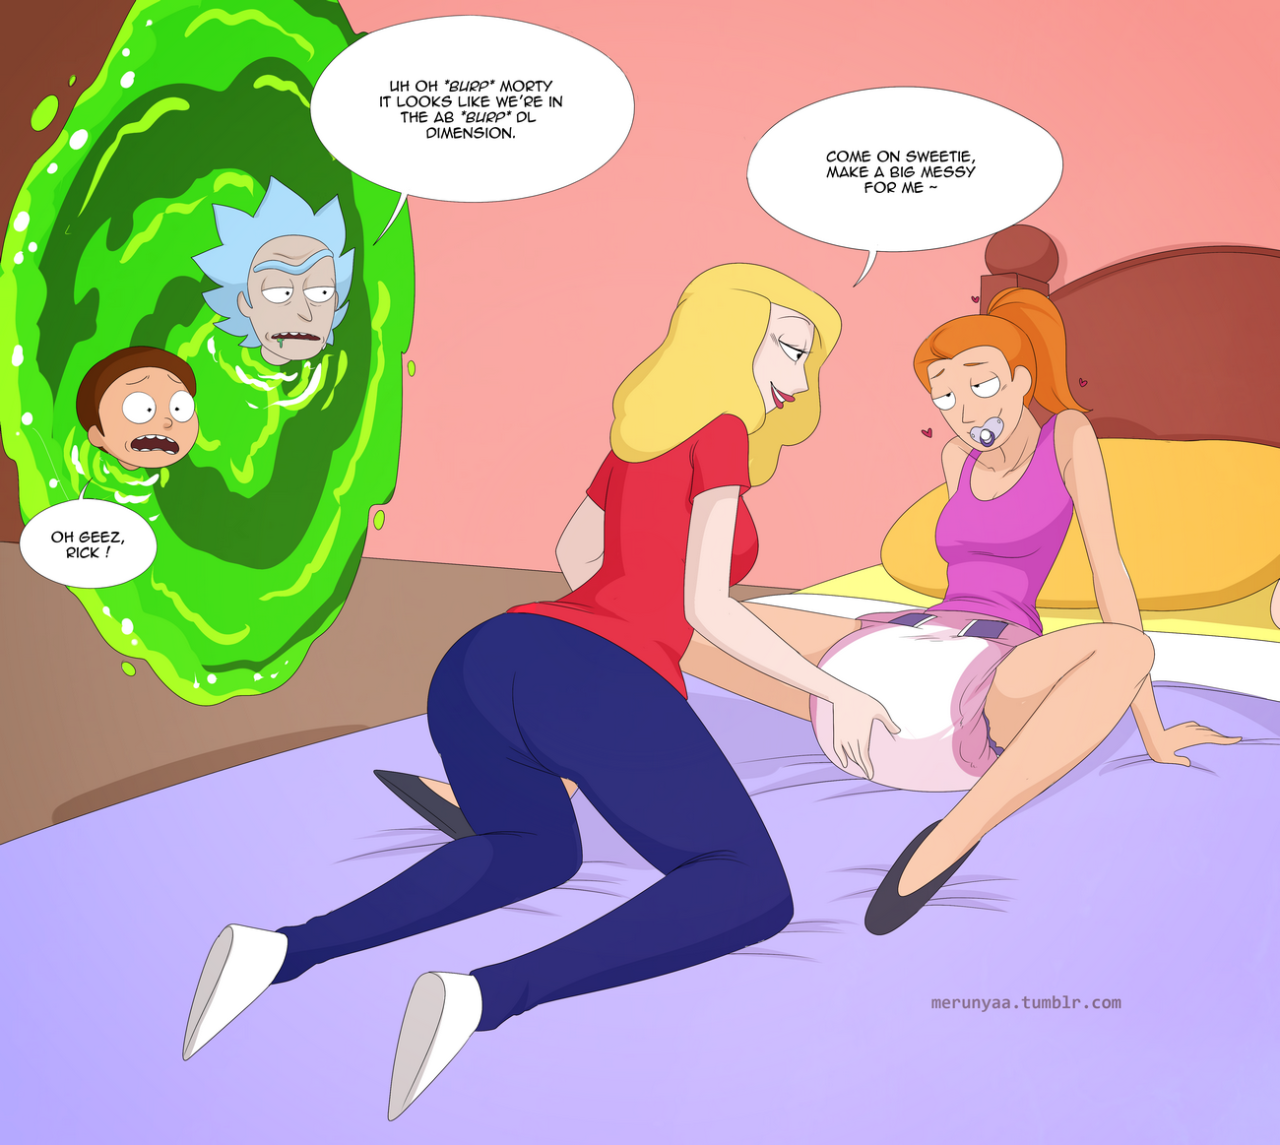 Rick and morty summer porn